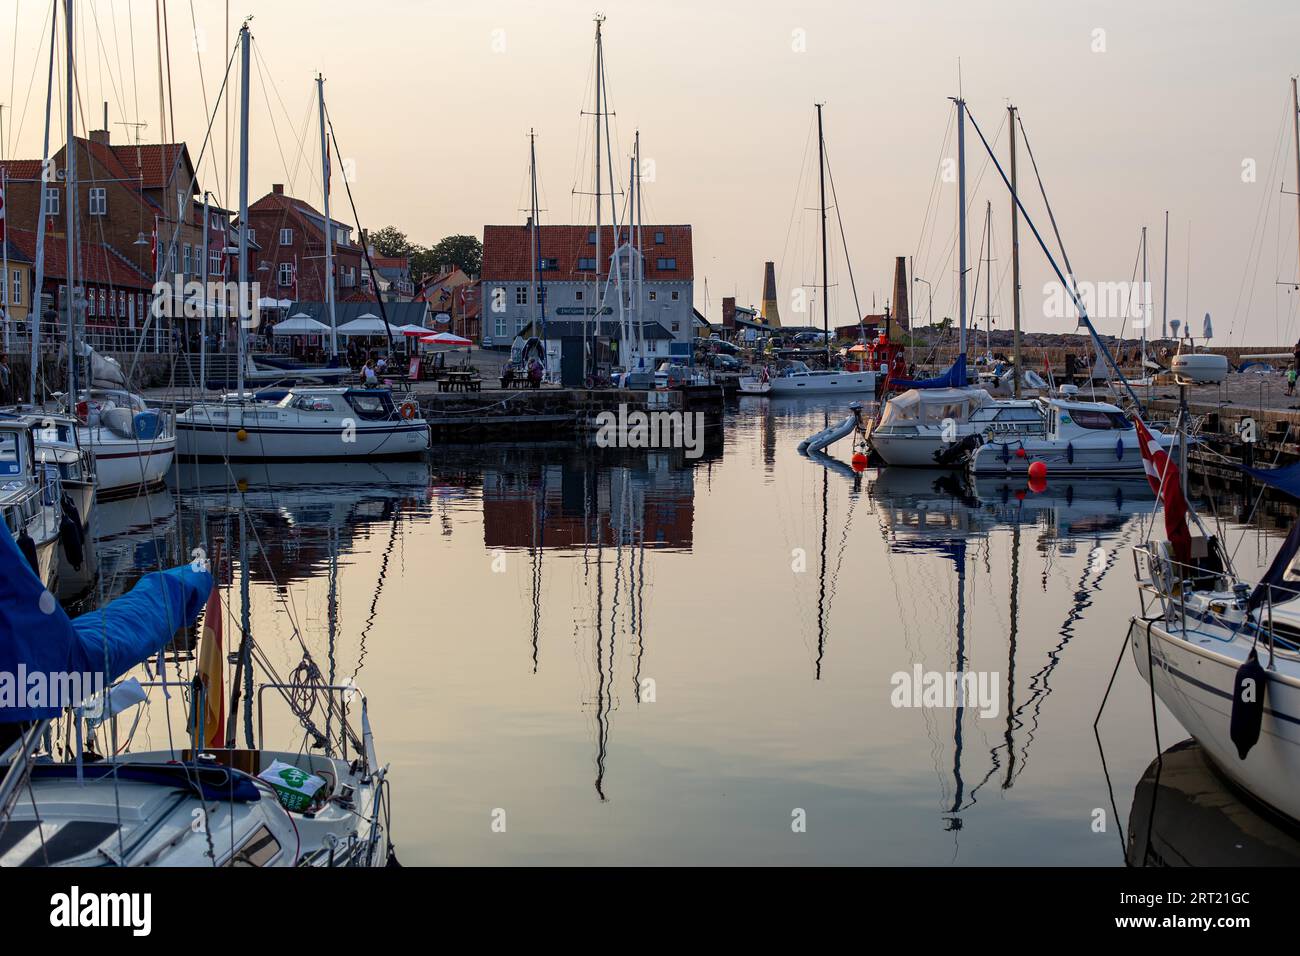 Bornholm, Denmark, August 6, 2020: Sailboats anchored at the small harbor in Allinge Stock Photo